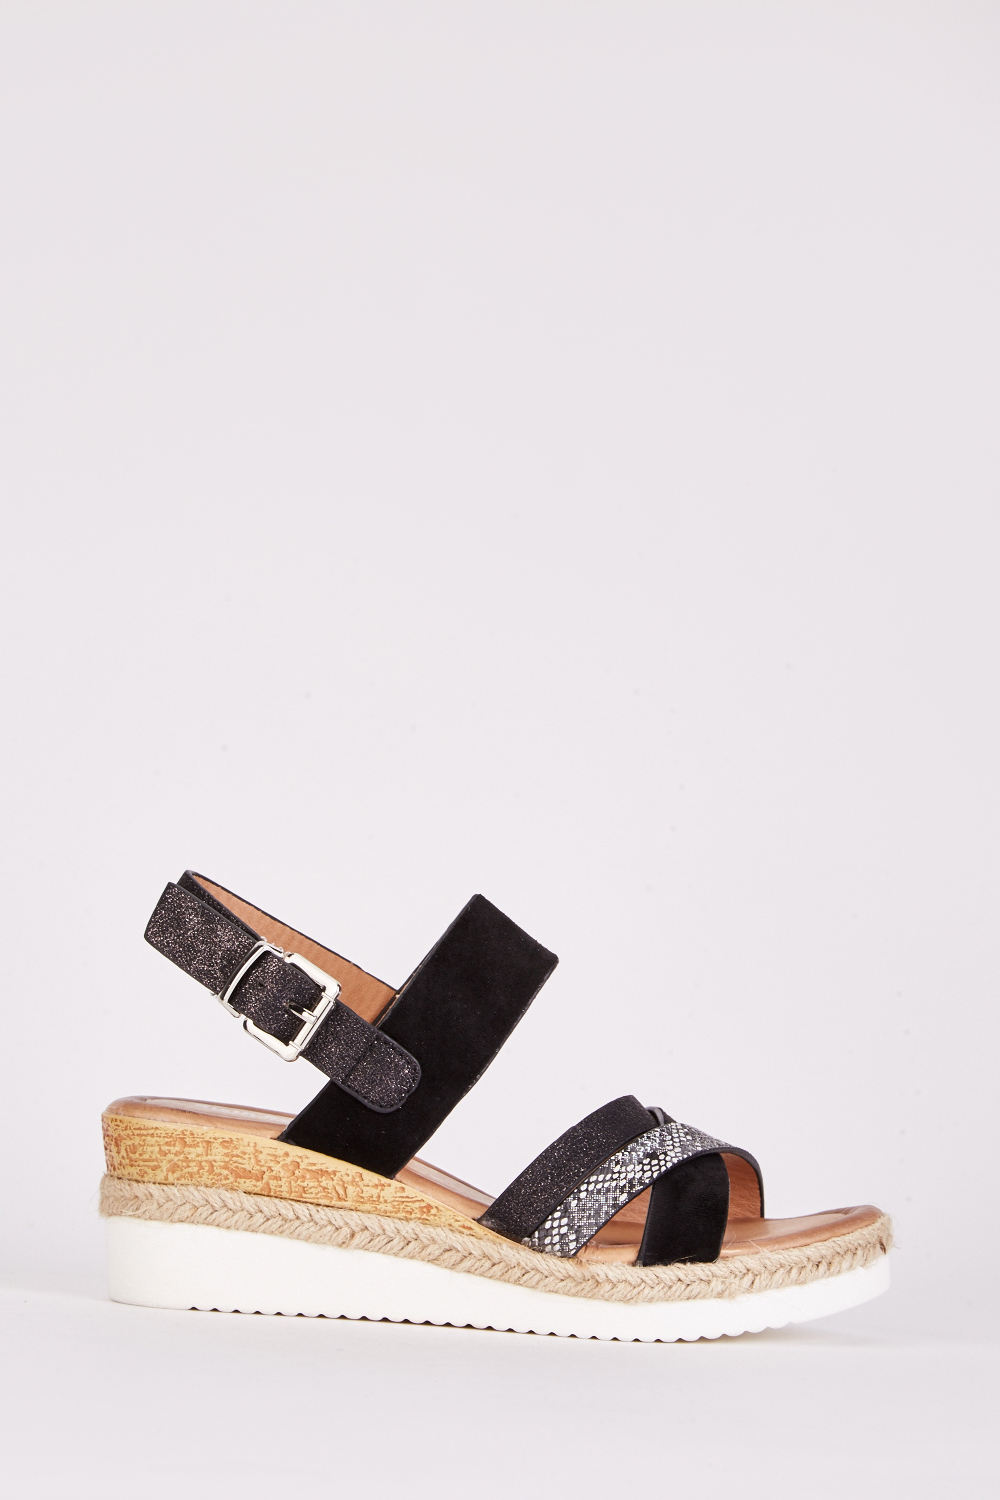 Contrasted Cross Strap Wedge Sandals